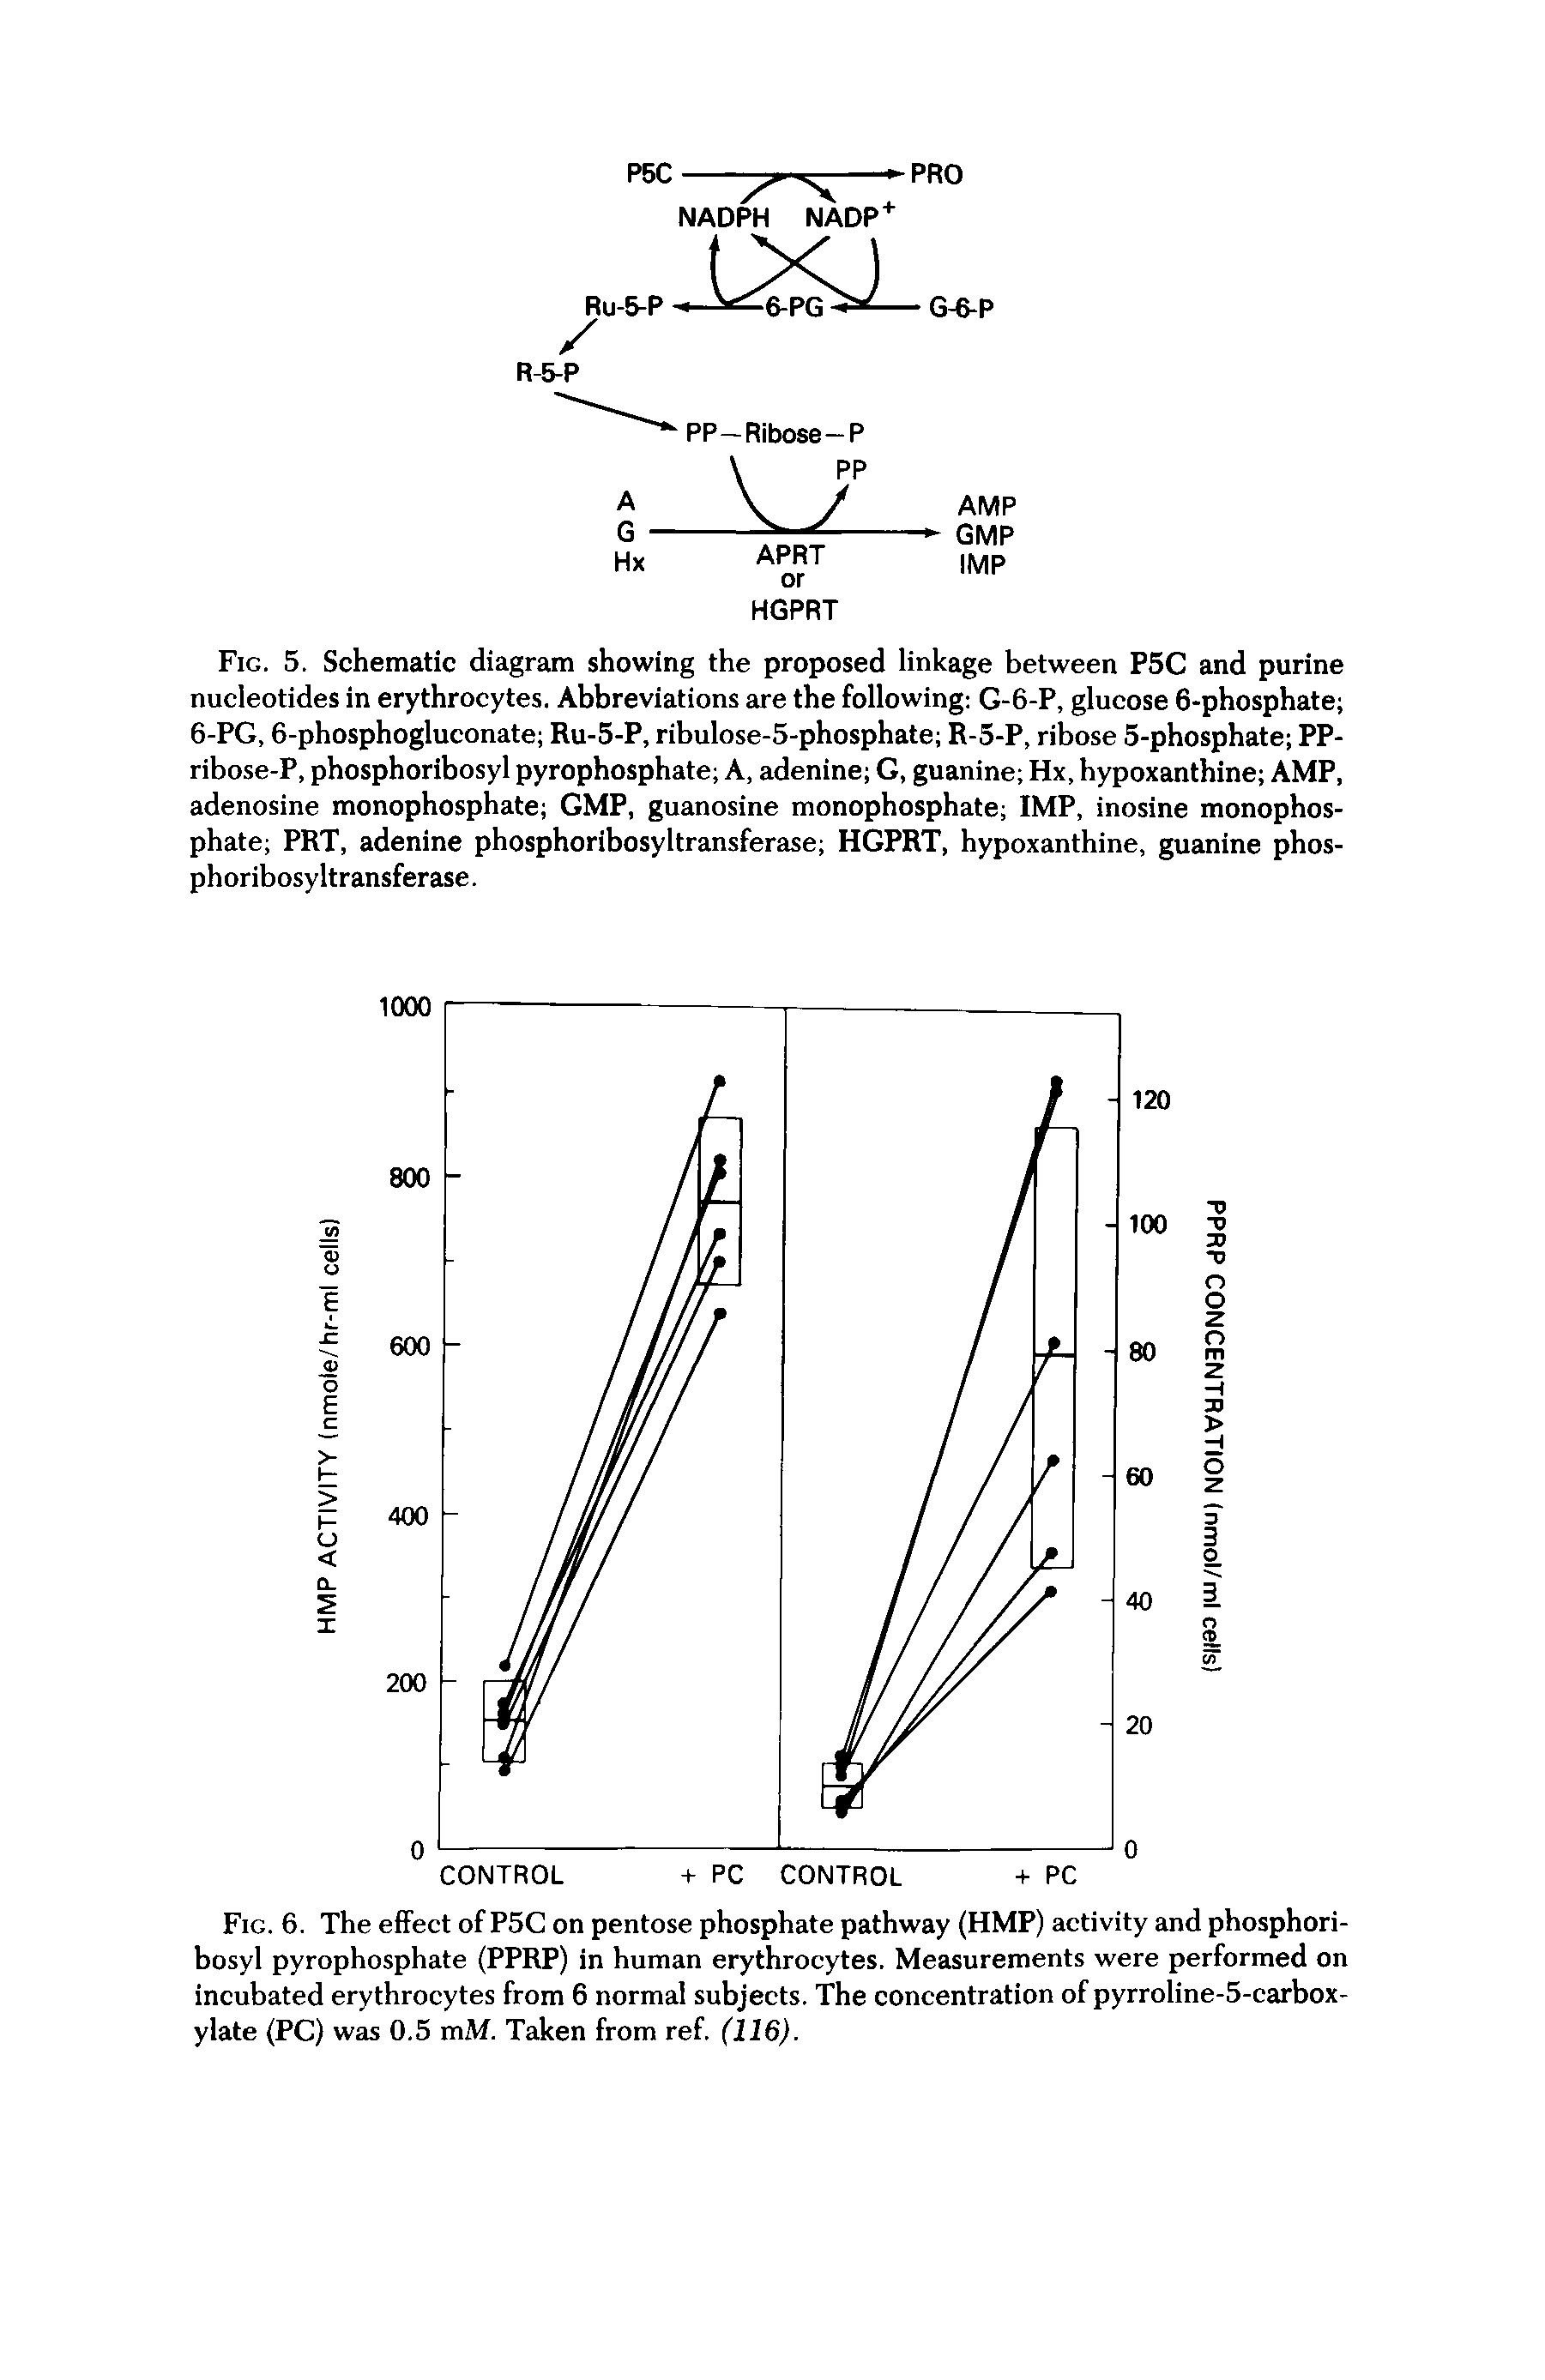 Fig. 6. The effect of P5C on pentose phosphate pathway (HMP) activity and phosphoribosyl pyrophosphate (PPRP) in human erythrocytes. Measurements were performed on incubated erythrocytes from 6 normal subjects. The concentration of pyrroline-5-carbox-ylate (PC) was 0.5 mM. Taken from ref. (116).